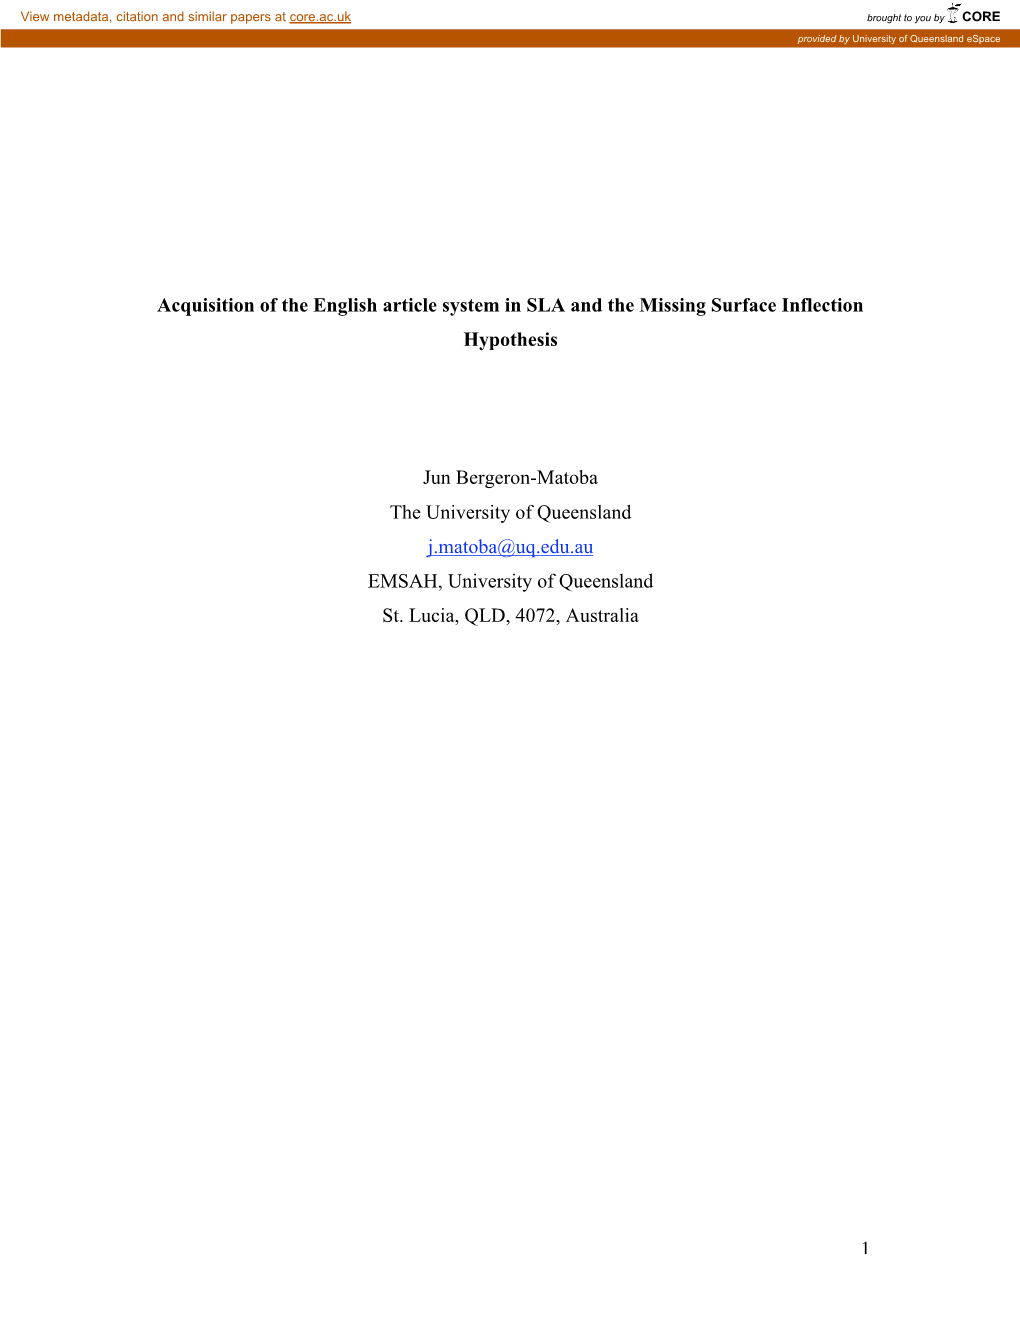 1 Acquisition of the English Article System in SLA and the Missing Surface Inflection Hypothesis